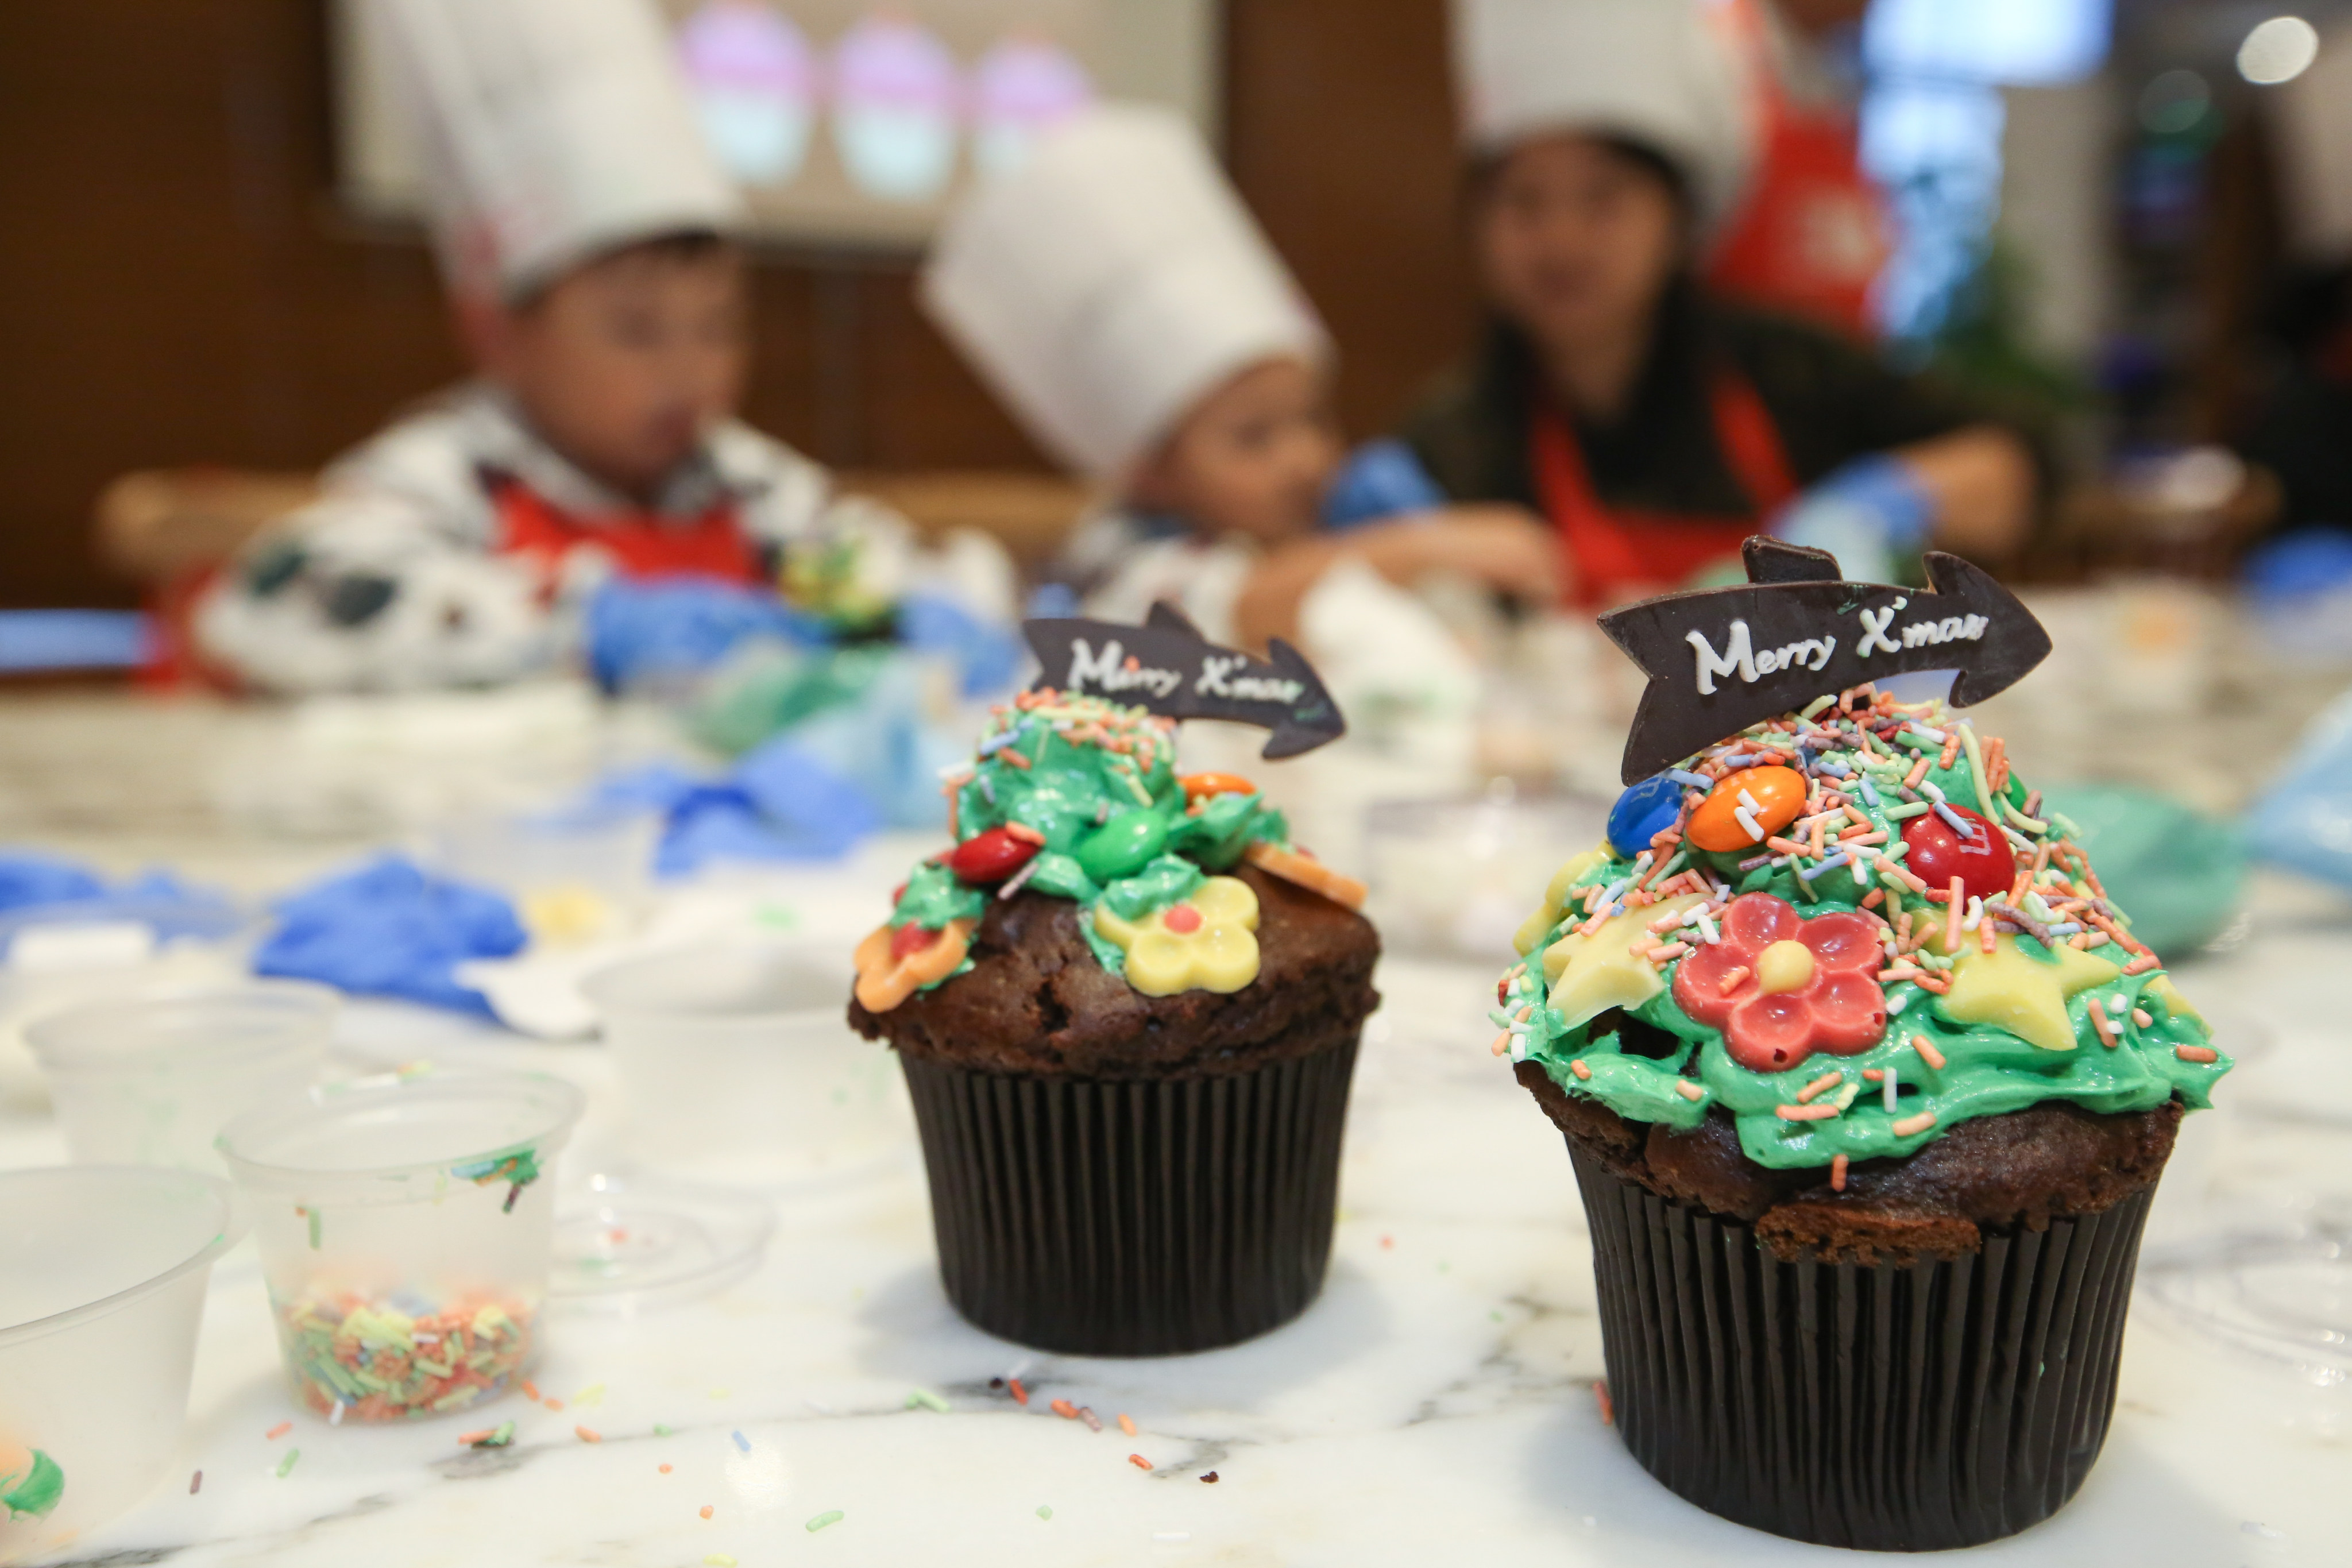 Cup cakes decorated with Christmas greetings. A previous directive had prevented bakeries in Malaysia with halal certificates from putting food items with festive greetings on display. Photo: Edmond So